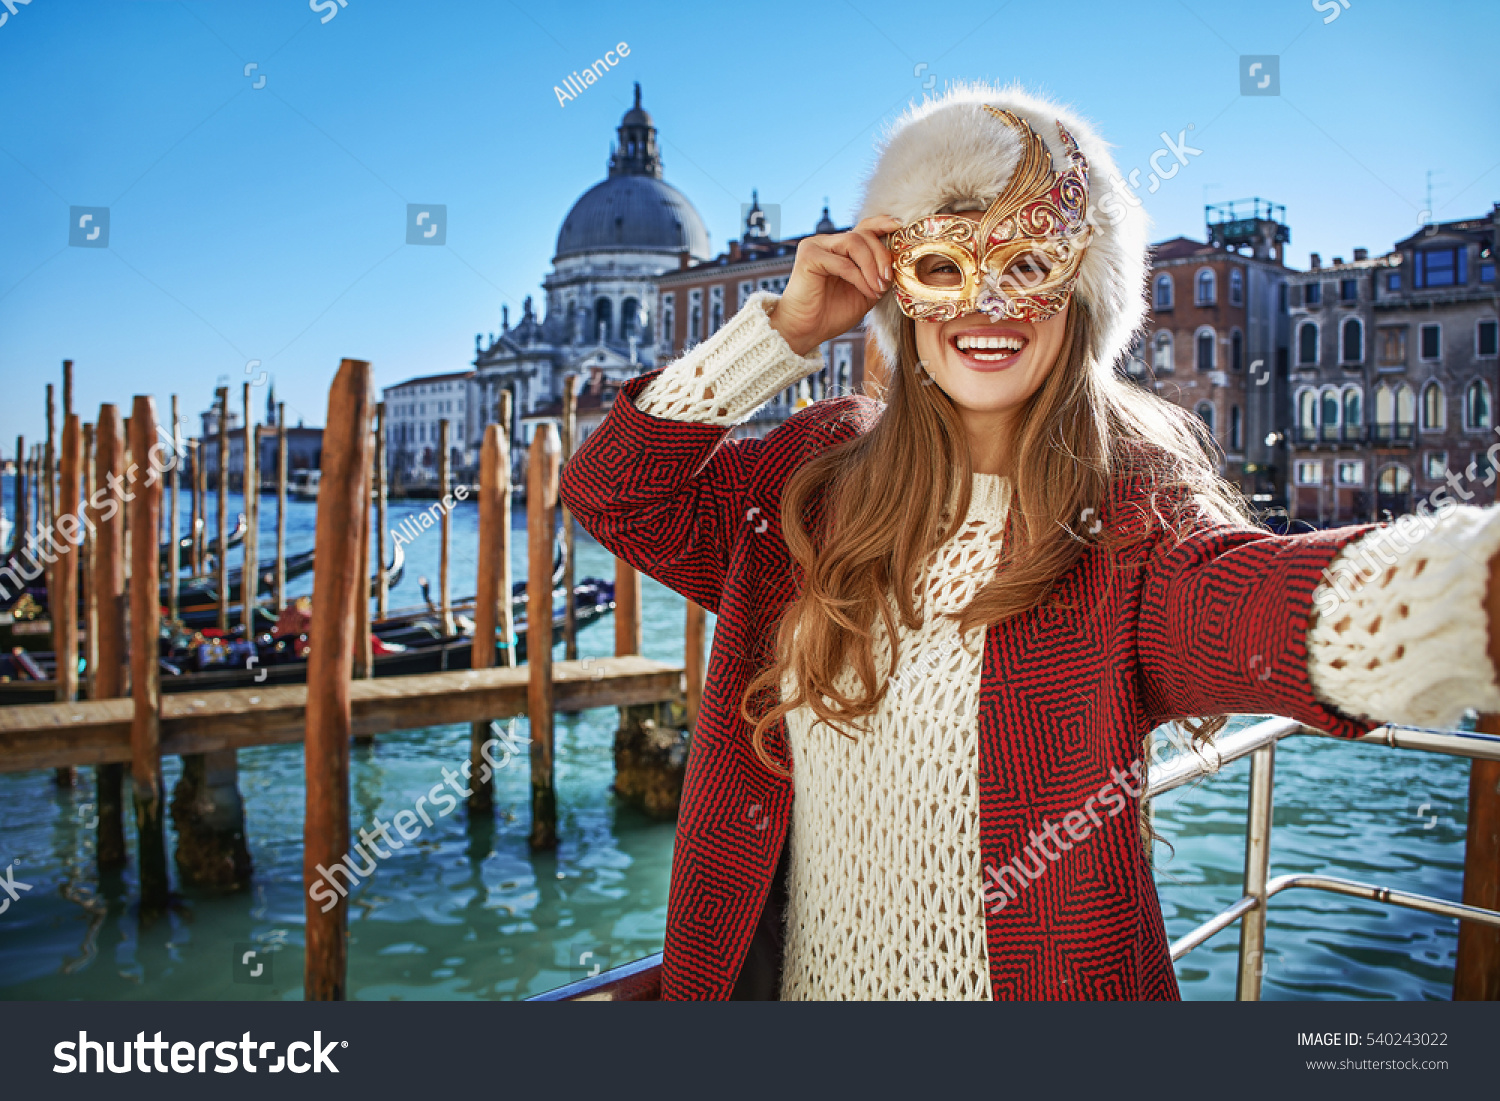 Another world vacation. Portrait of smiling elegant woman in fur hat in Venice, Italy taking selfie while in Venetian mask #540243022